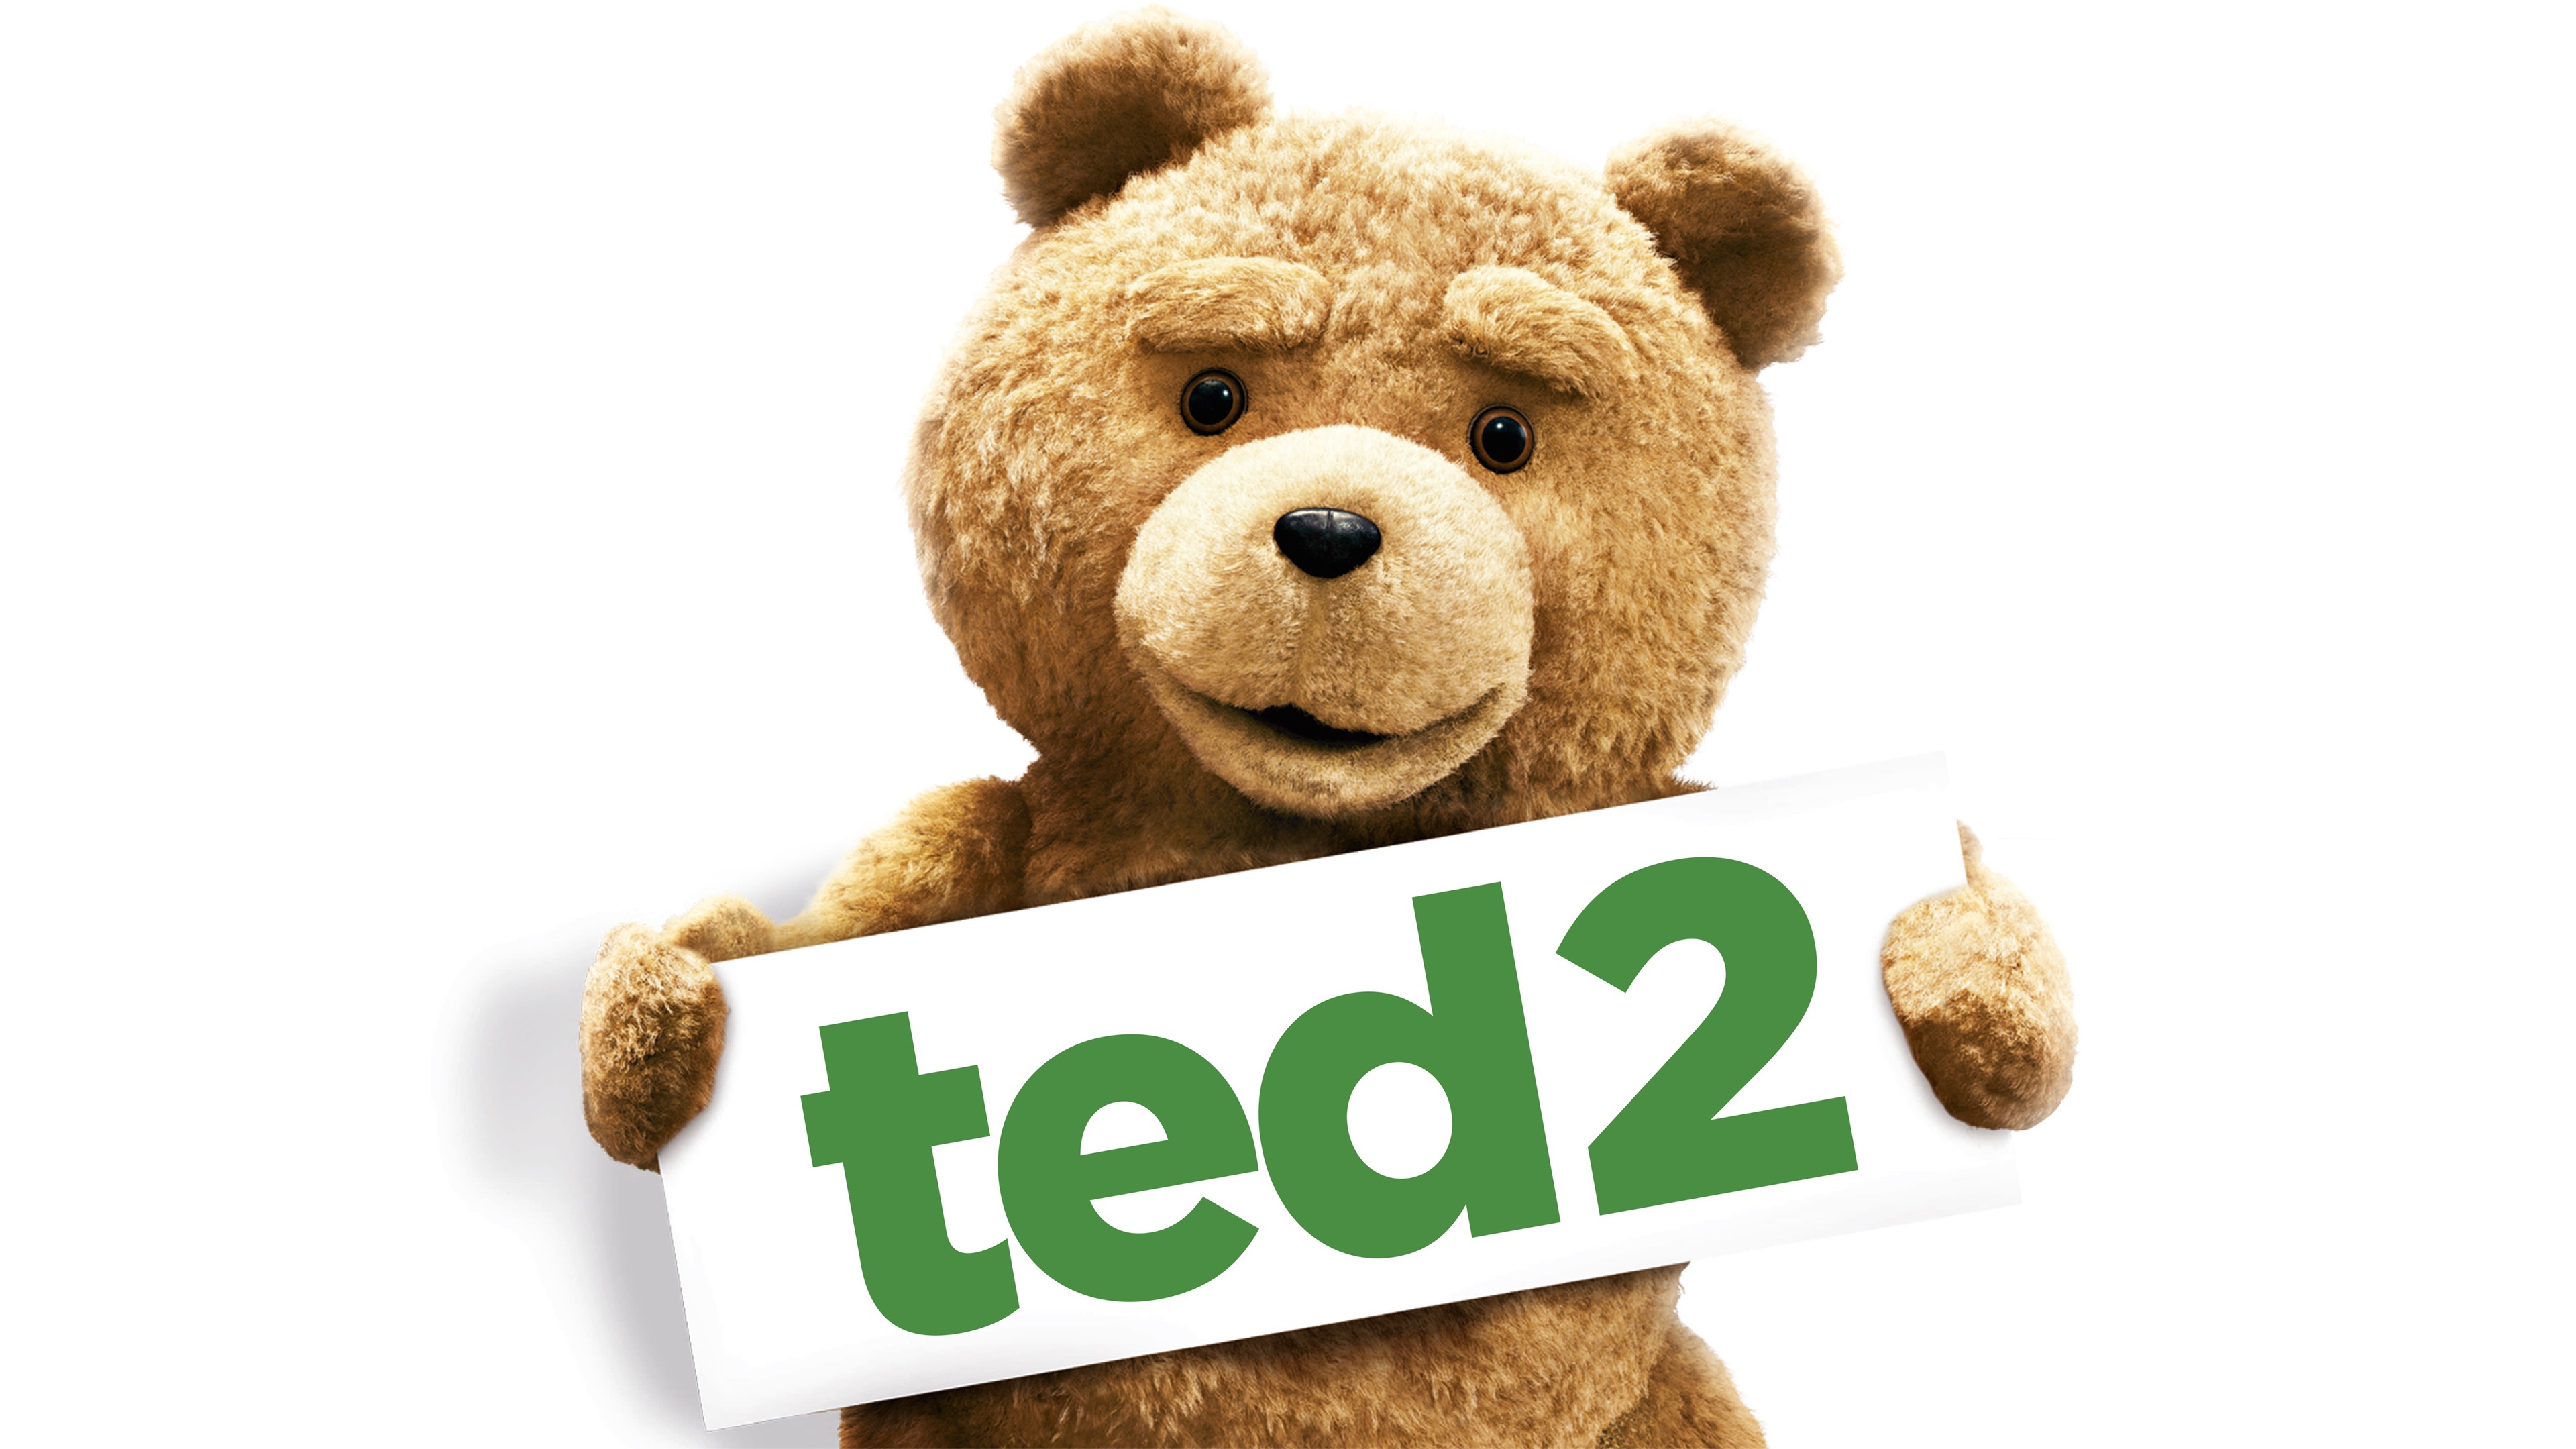 2015 ted 2 movie 3840 x 2160 04